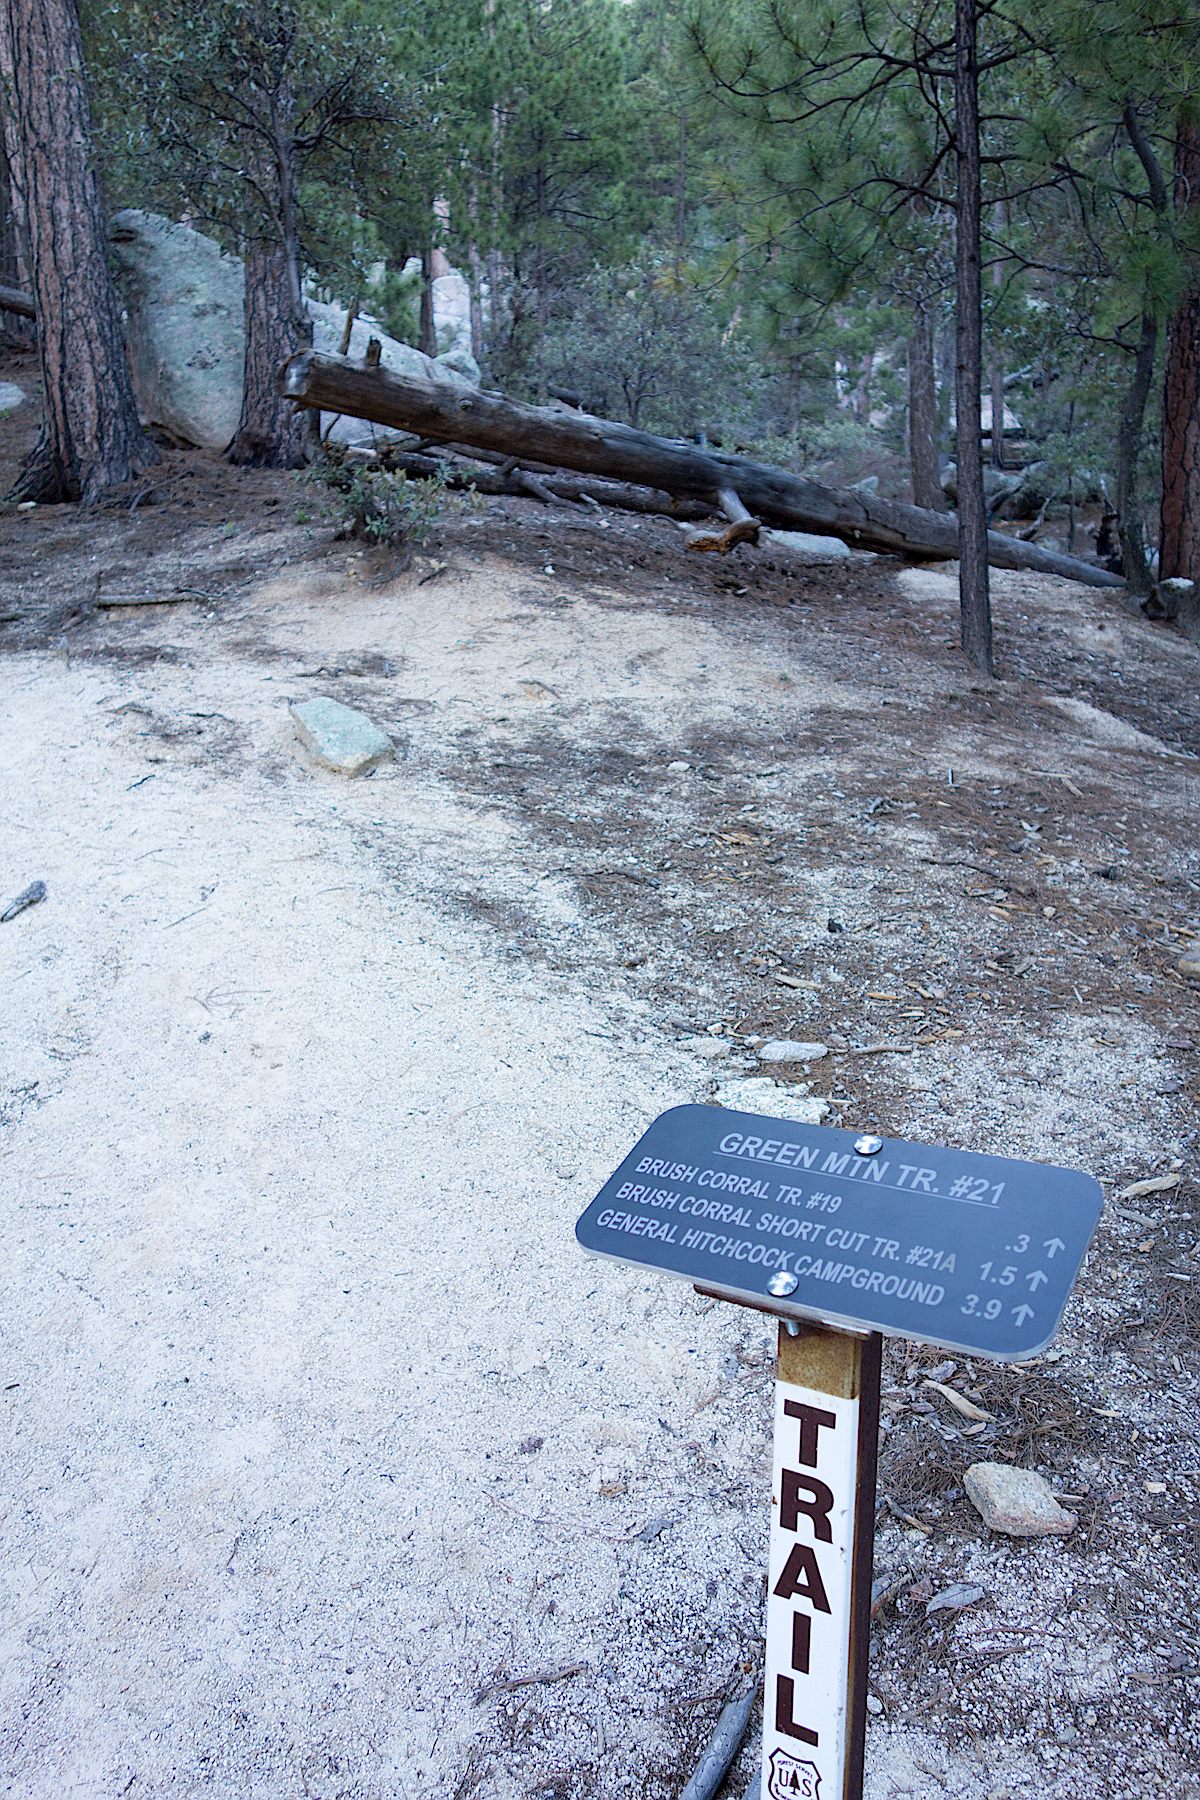 Small trail sign at the start of the trail. September 2014.